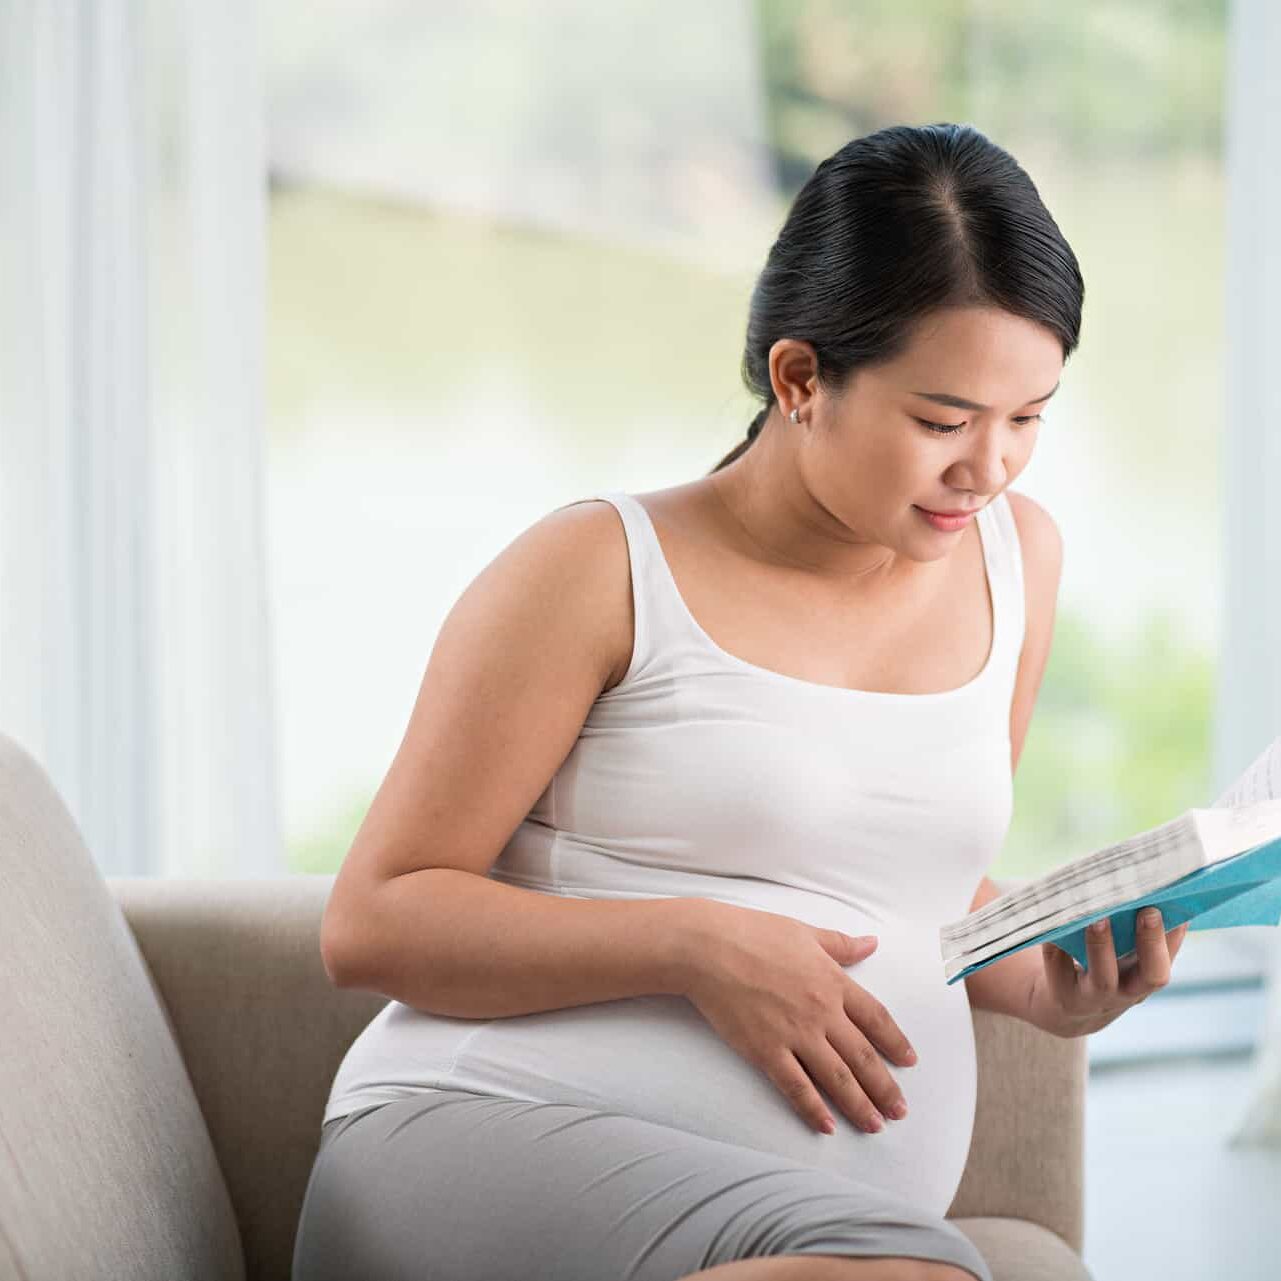 A pregnant woman sitting on a couch reading a book.